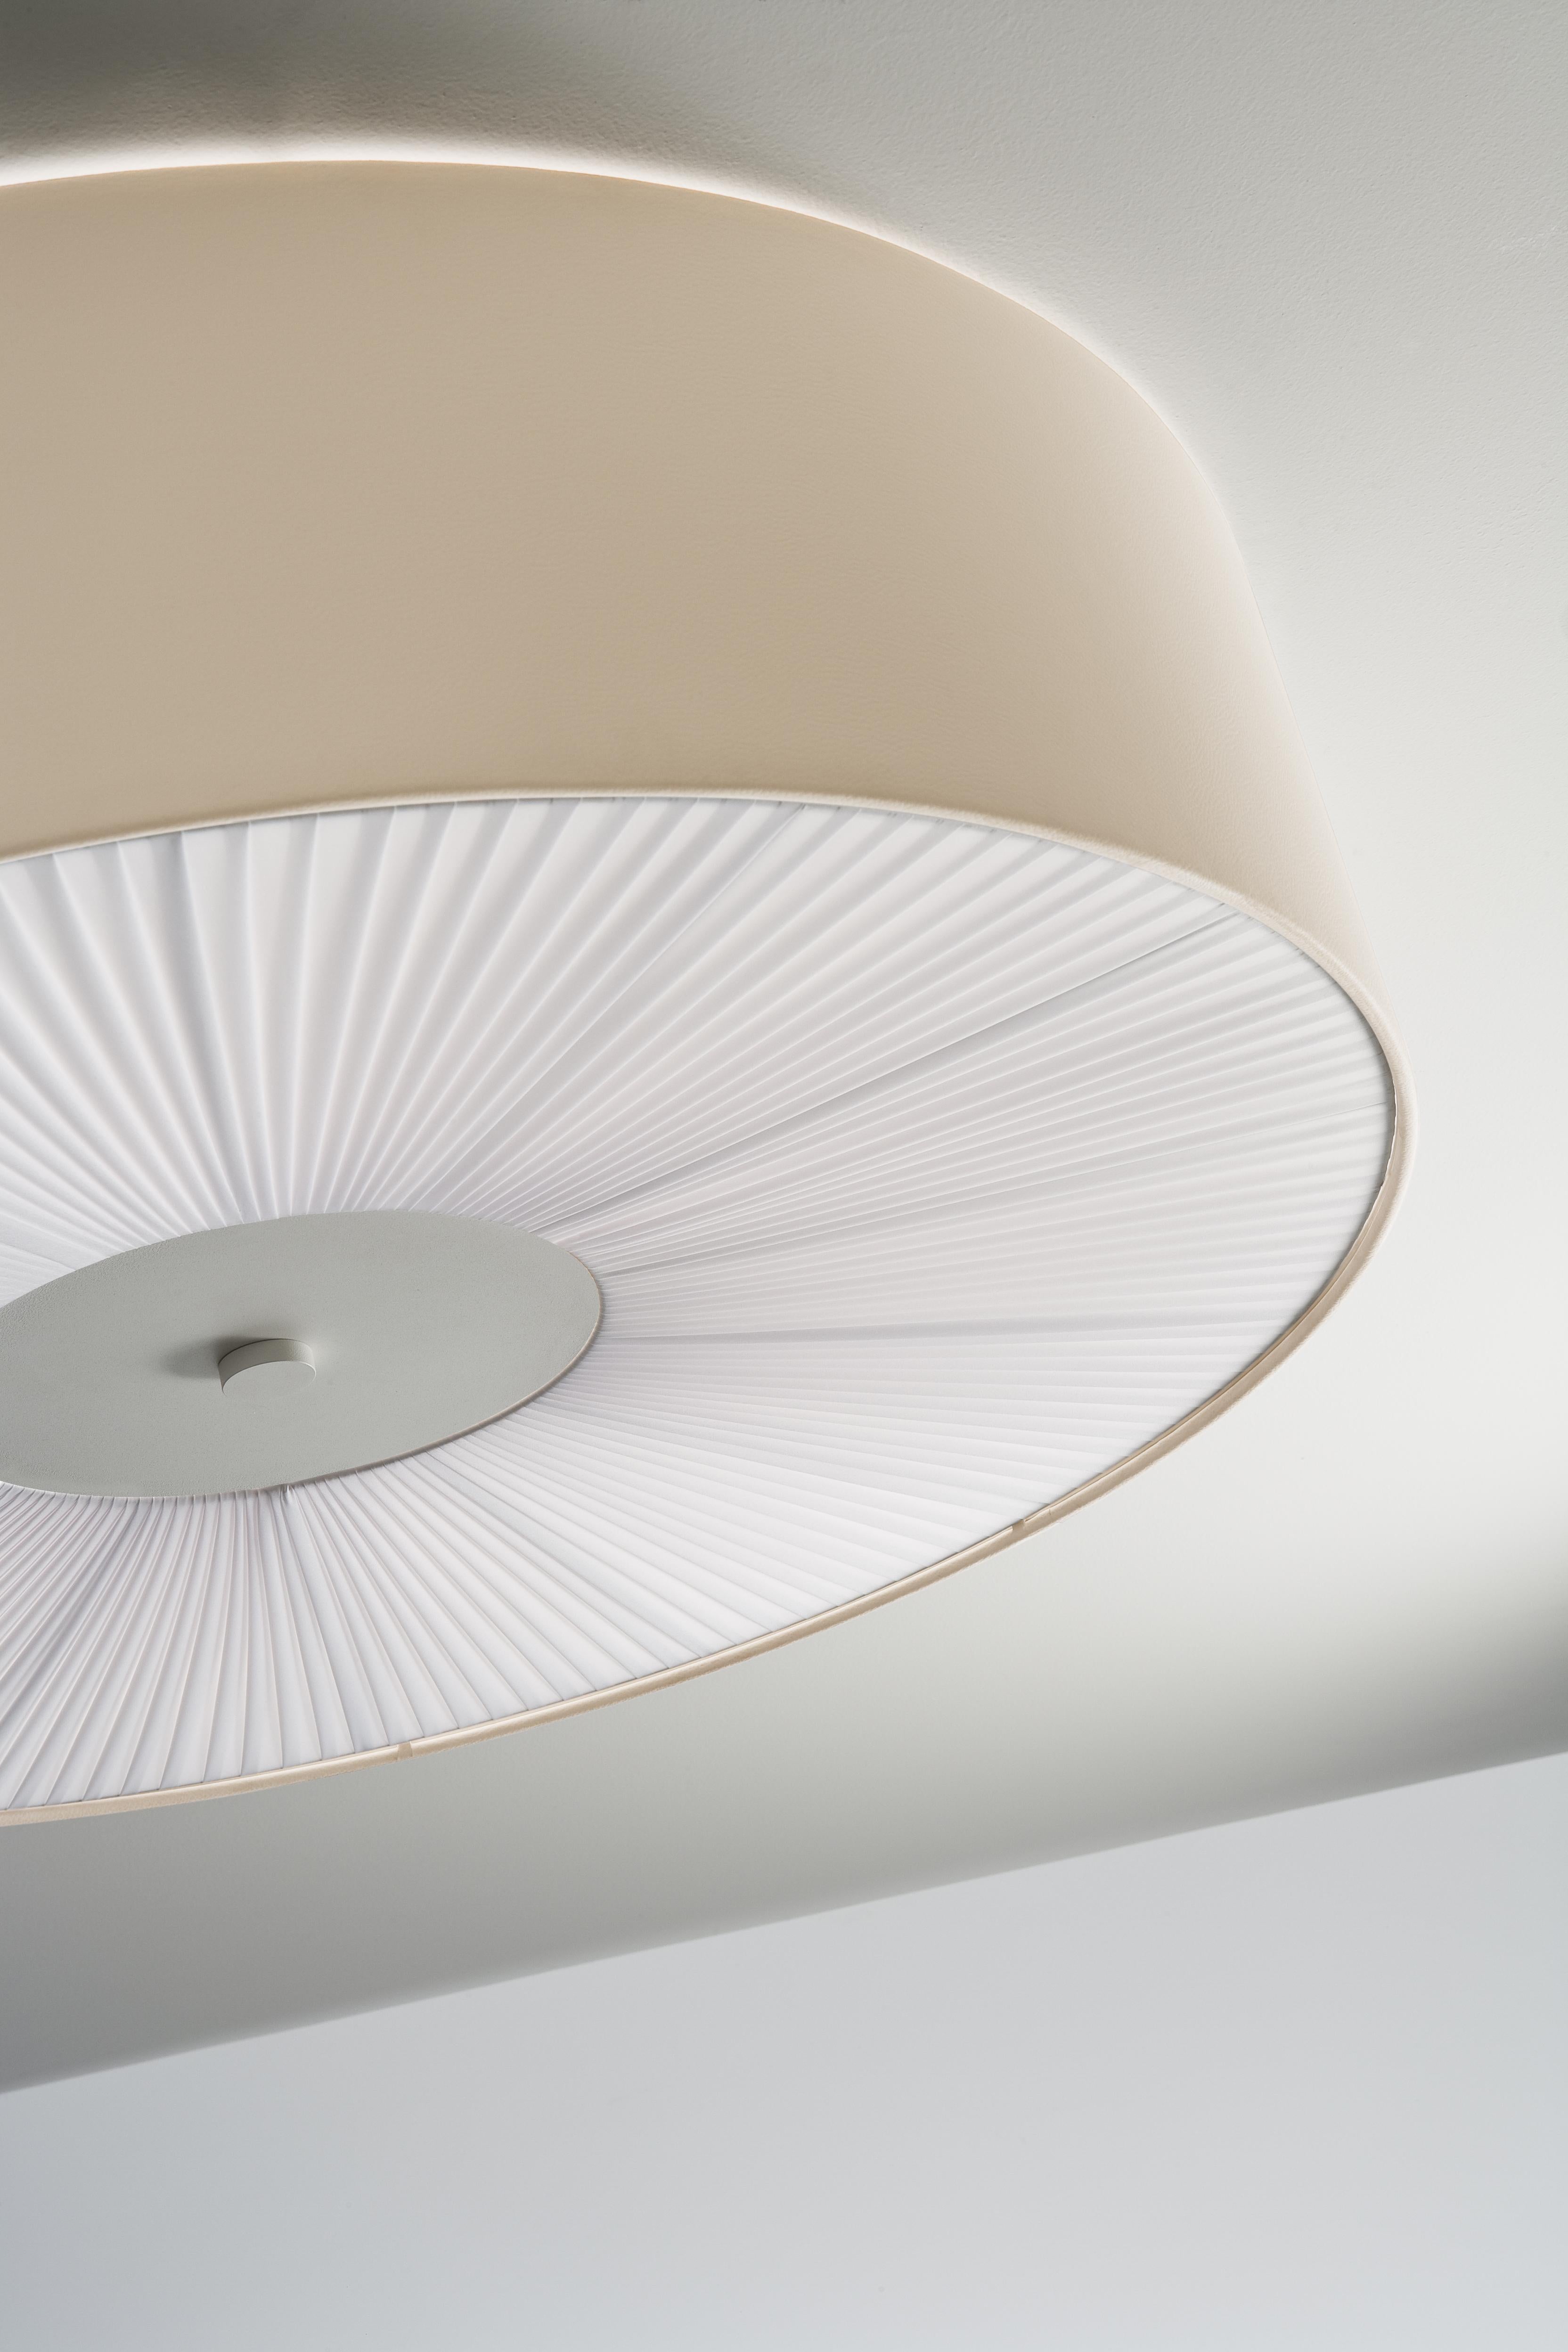 Axolight Skin Large Flush Mount in Ivory White by Manuel Vivian

Refined rationality of perfect form. Skin reveals itself in its simplicity with multiple colors in fireproof eco-leather and different sizes, giving uniqueness and elegance to any